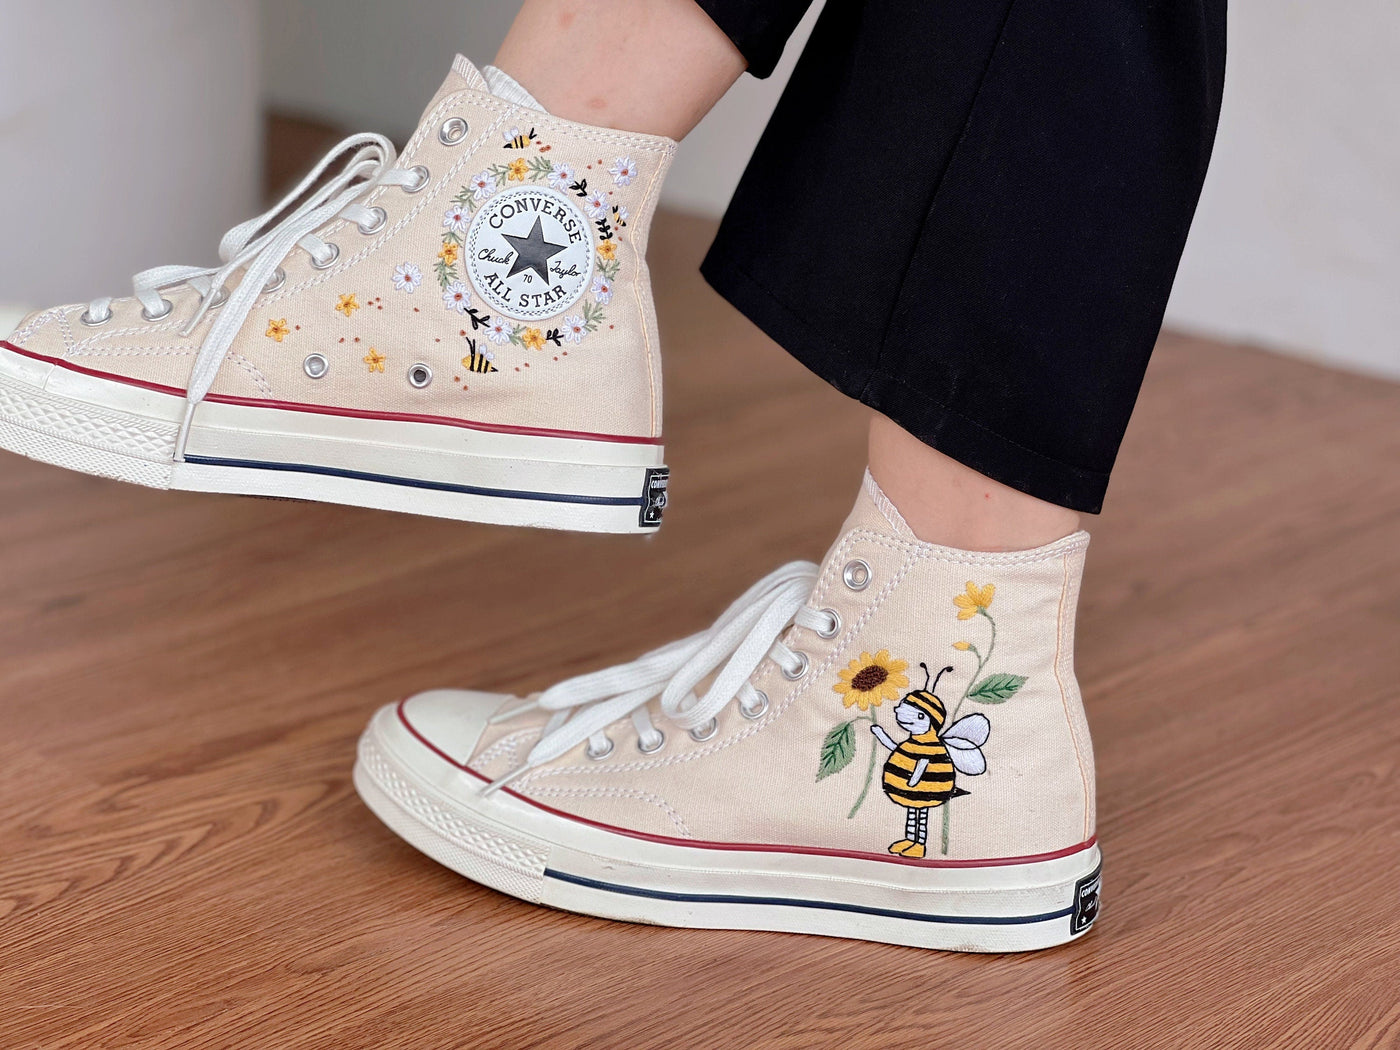 Embroidered Converse,Bees Converse,Converse High Tops Bees And Flower